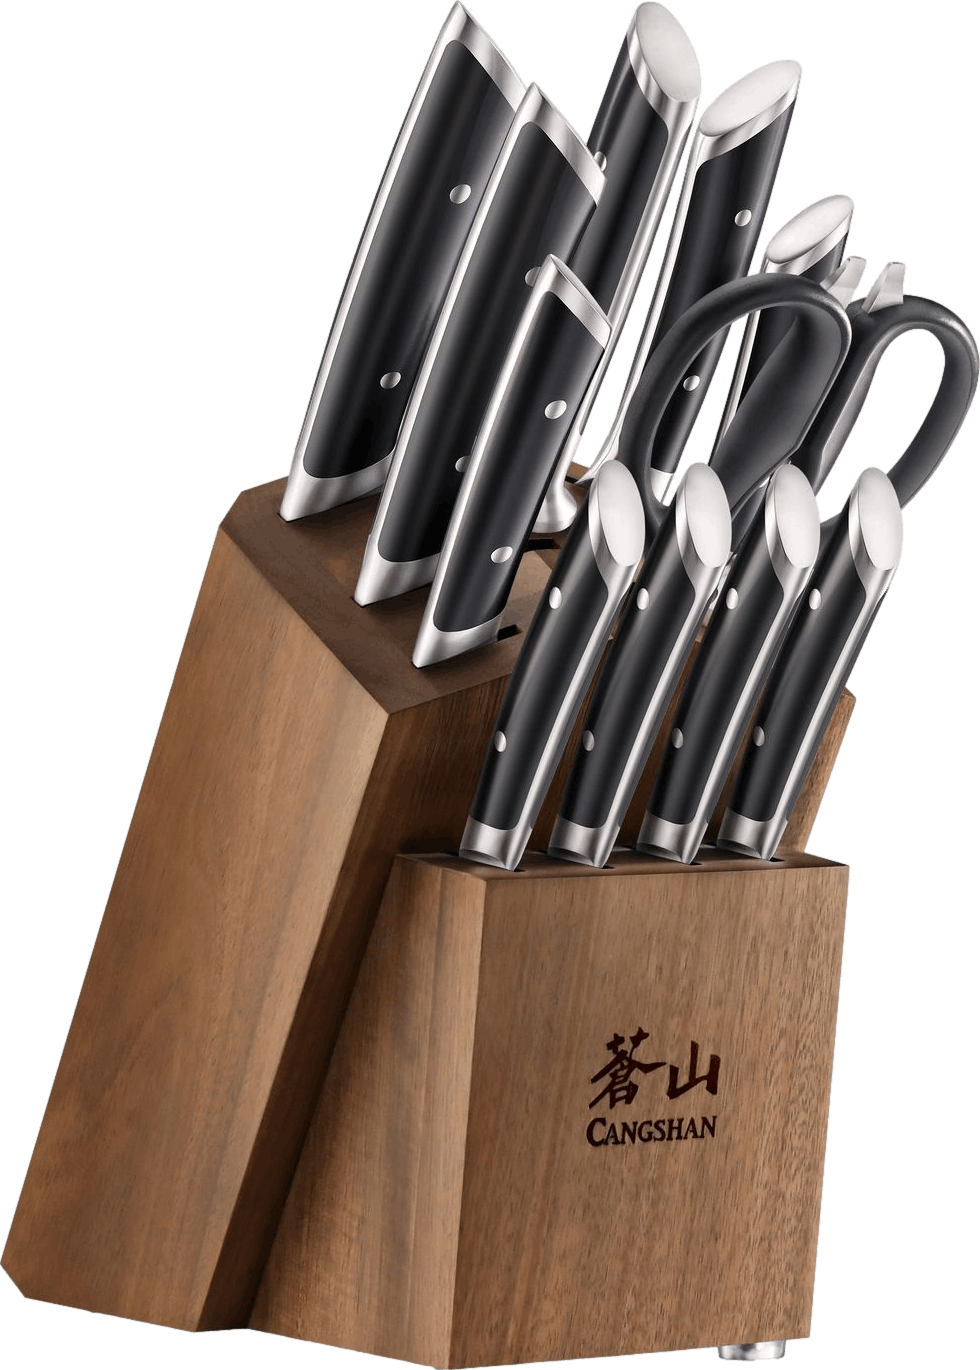 Knife set, 23 Pcs Kitchen Knife Set with Block and Sharpener Rod, High  Carbon Stainless Steel Chef knife set for kitchen, Ultra Sharp, Full-Tang